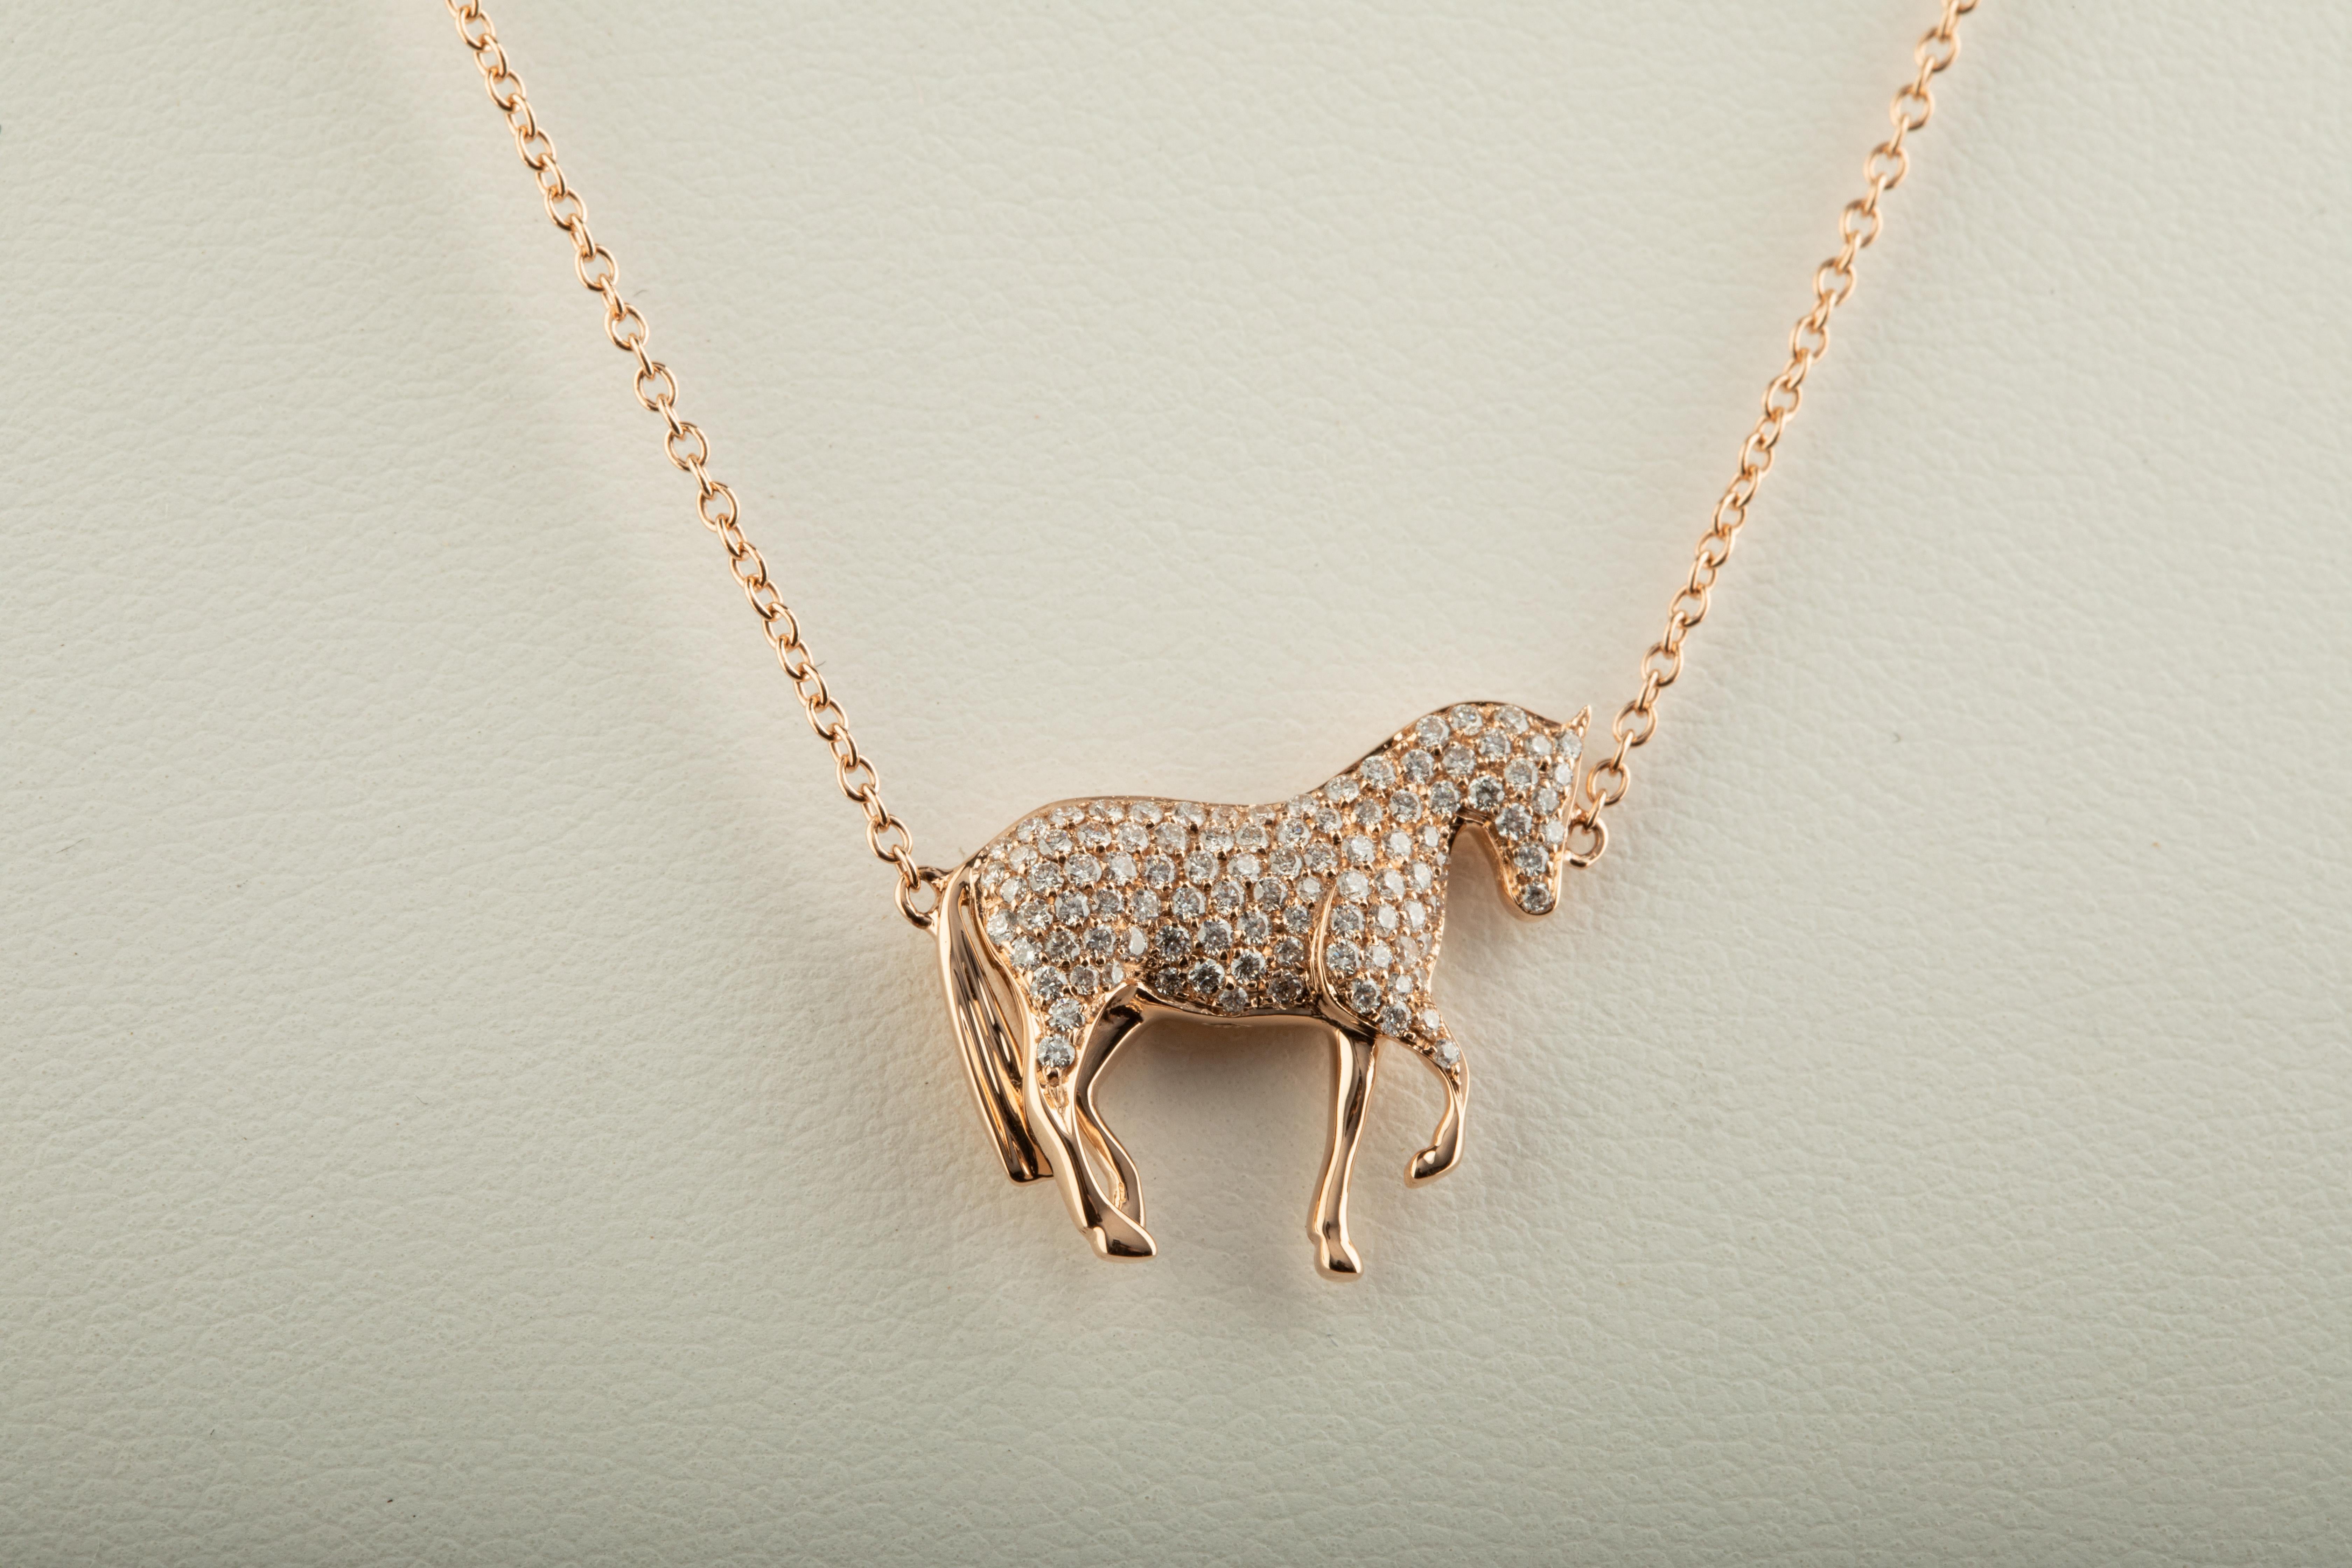 Ubaldi Gioielli, Equestrian jewelry, hand made in Italy, 
exclusive design and manufacture,
this horse pendant, with a very fine design and an amazing Diamonds pave setting, has a rolo 18kt rose gold chain and adjustment HorseBites links for an easy